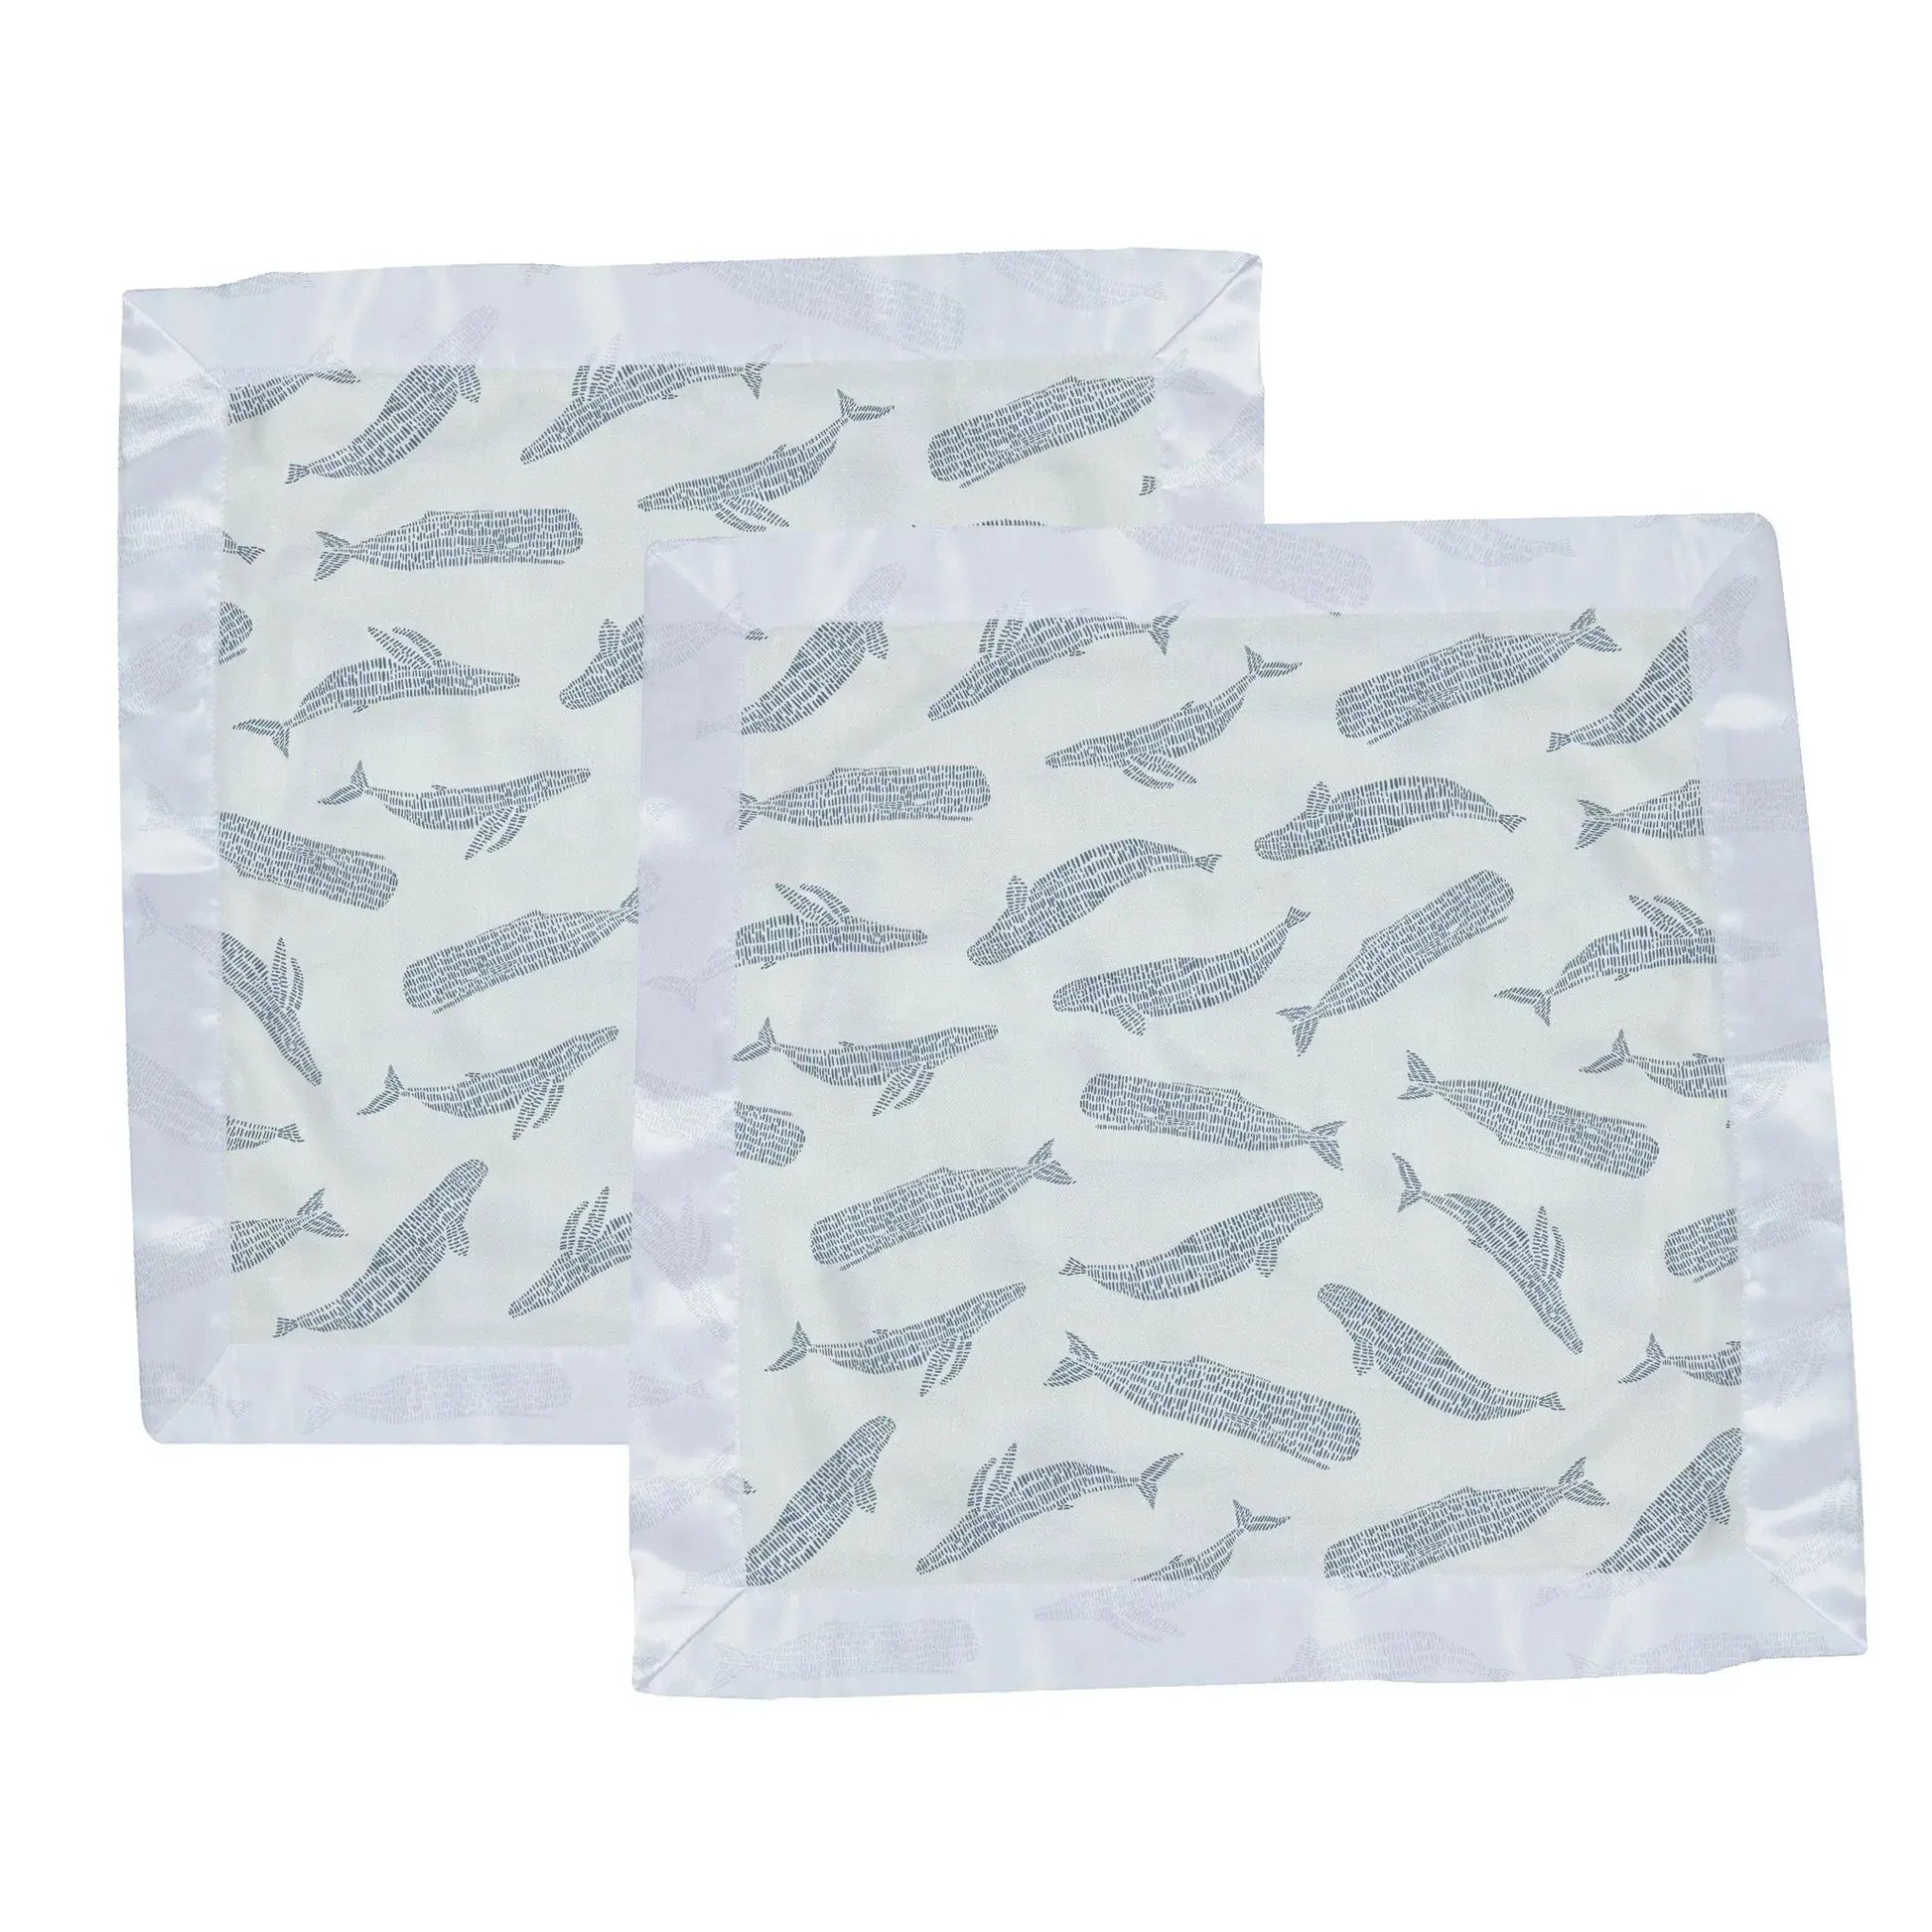 Security Blanket 2PK | Bamboo Fabric - Blue Whales Newcastle Classics